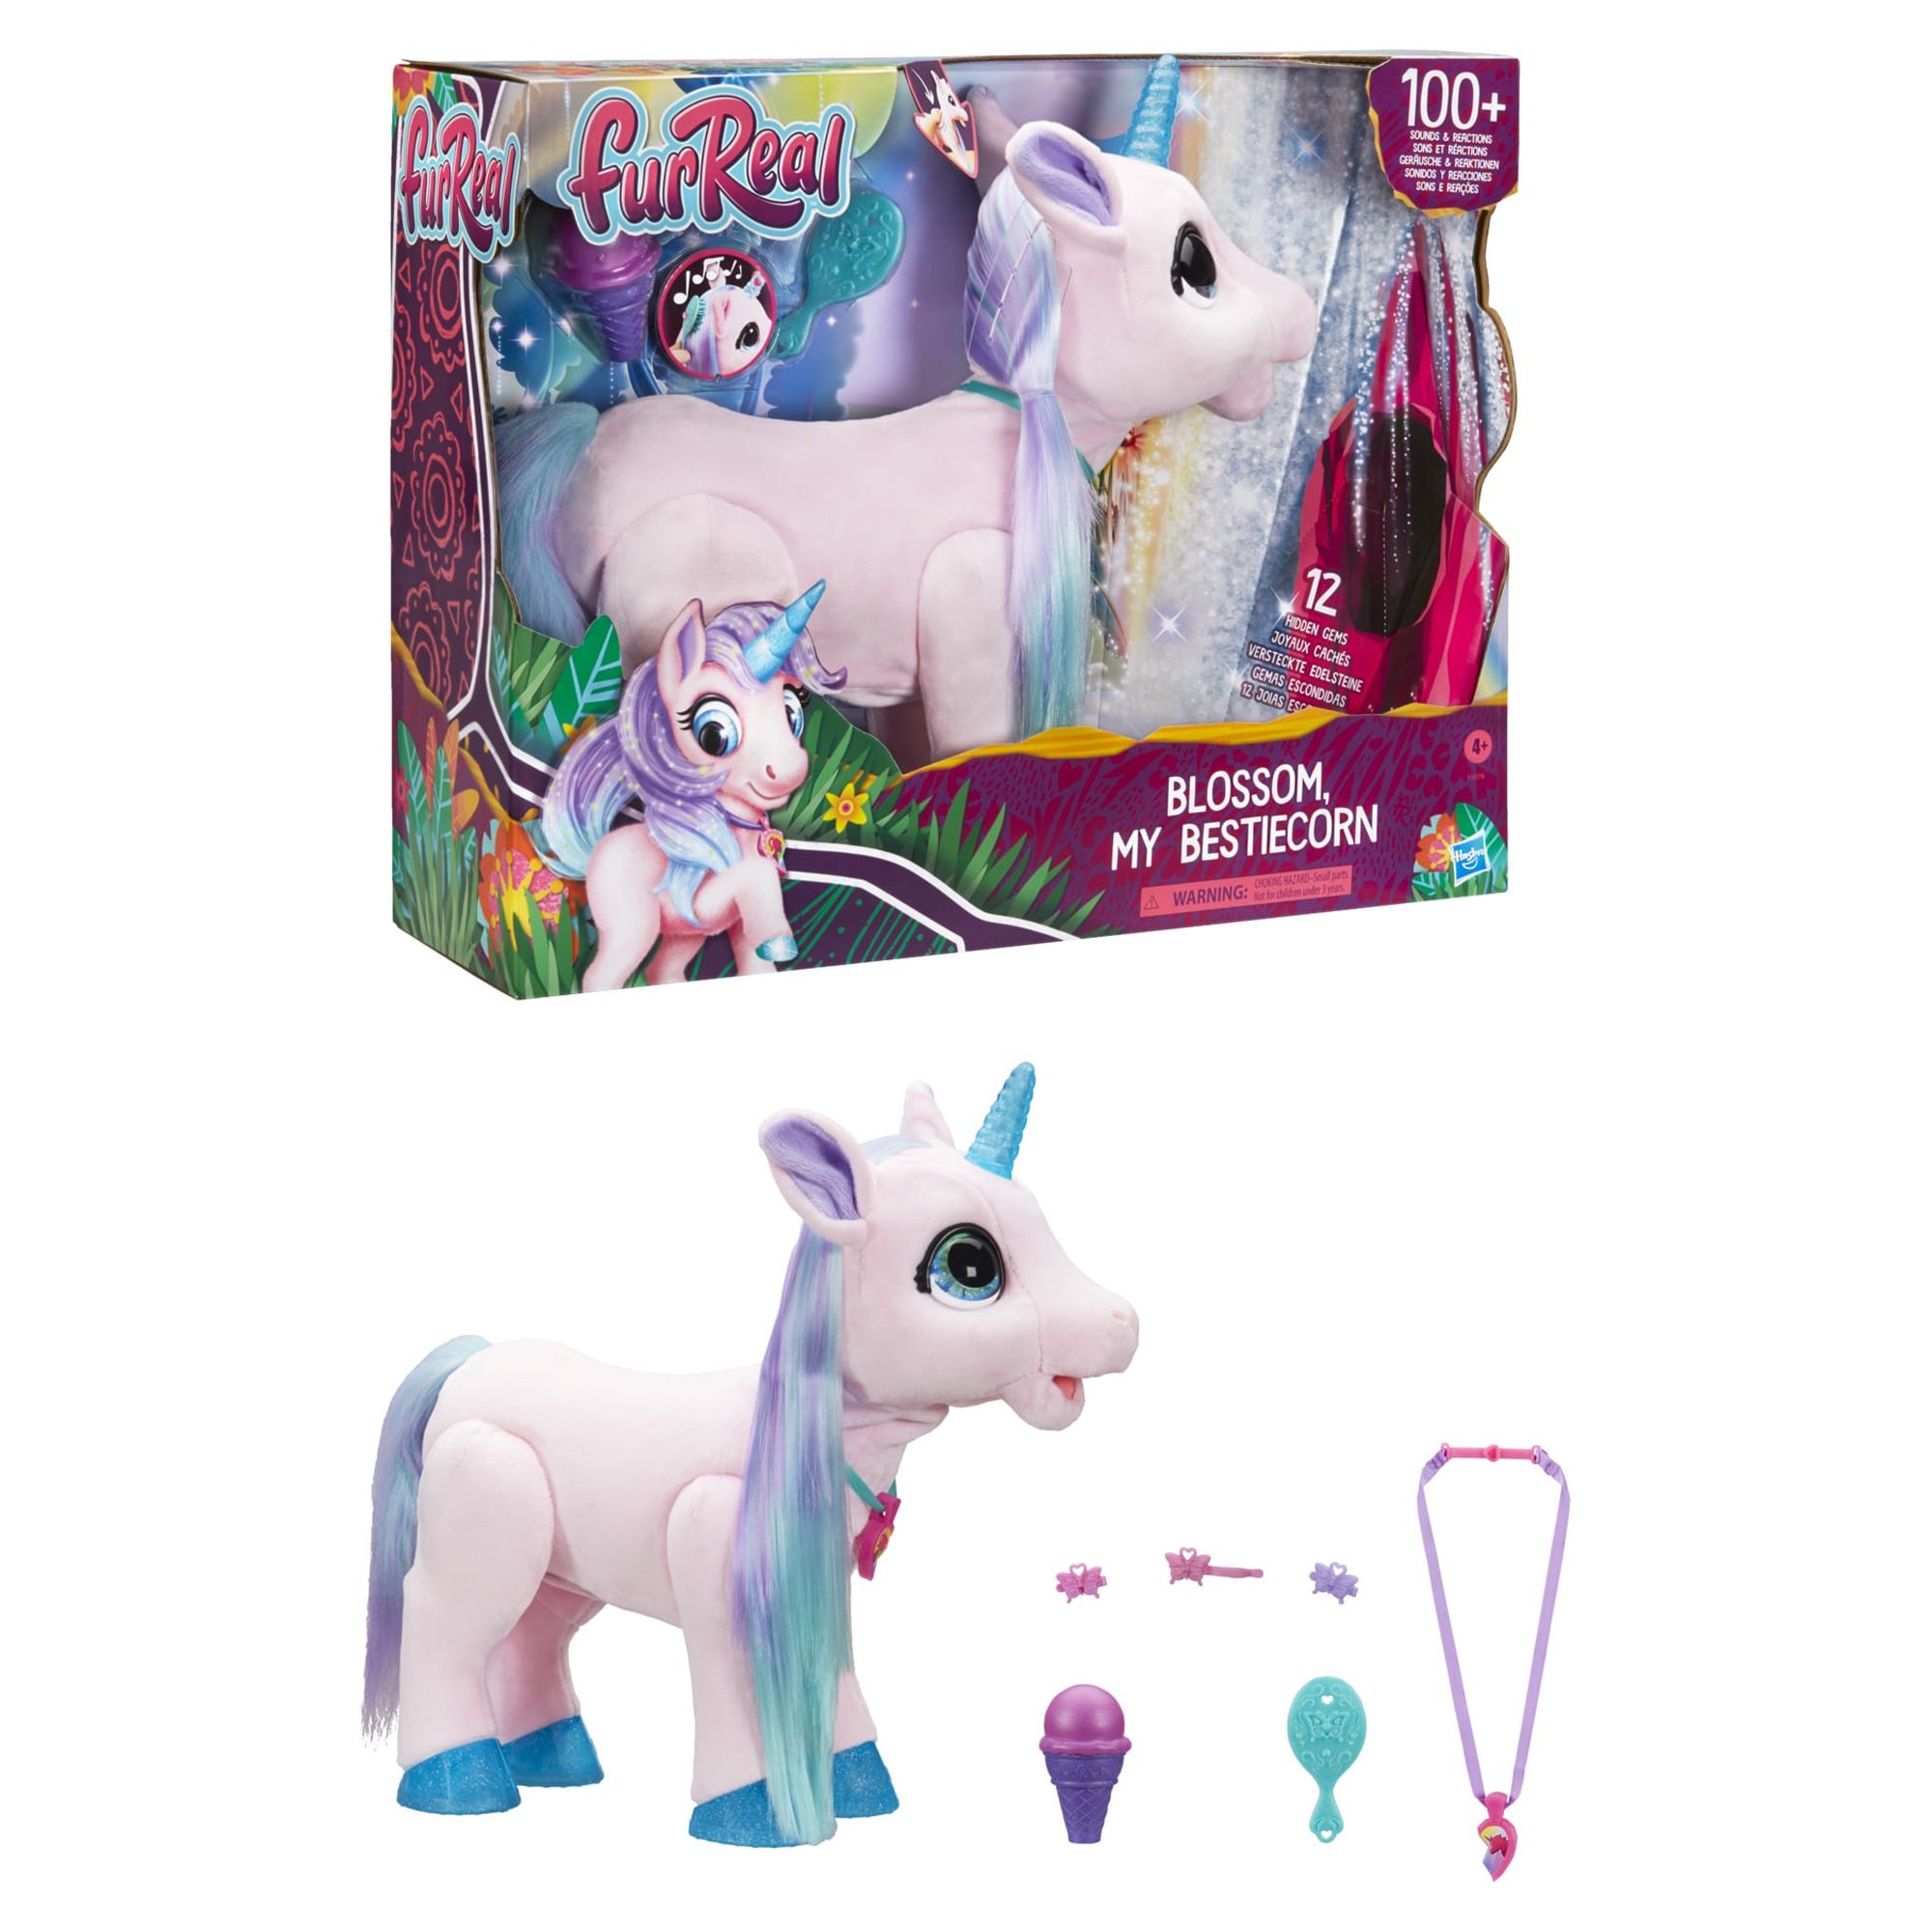 furReal Blossom My Bestiecorn Interactive Plush Pet Toy, 100+ Sounds & Reactions - image 1 of 9